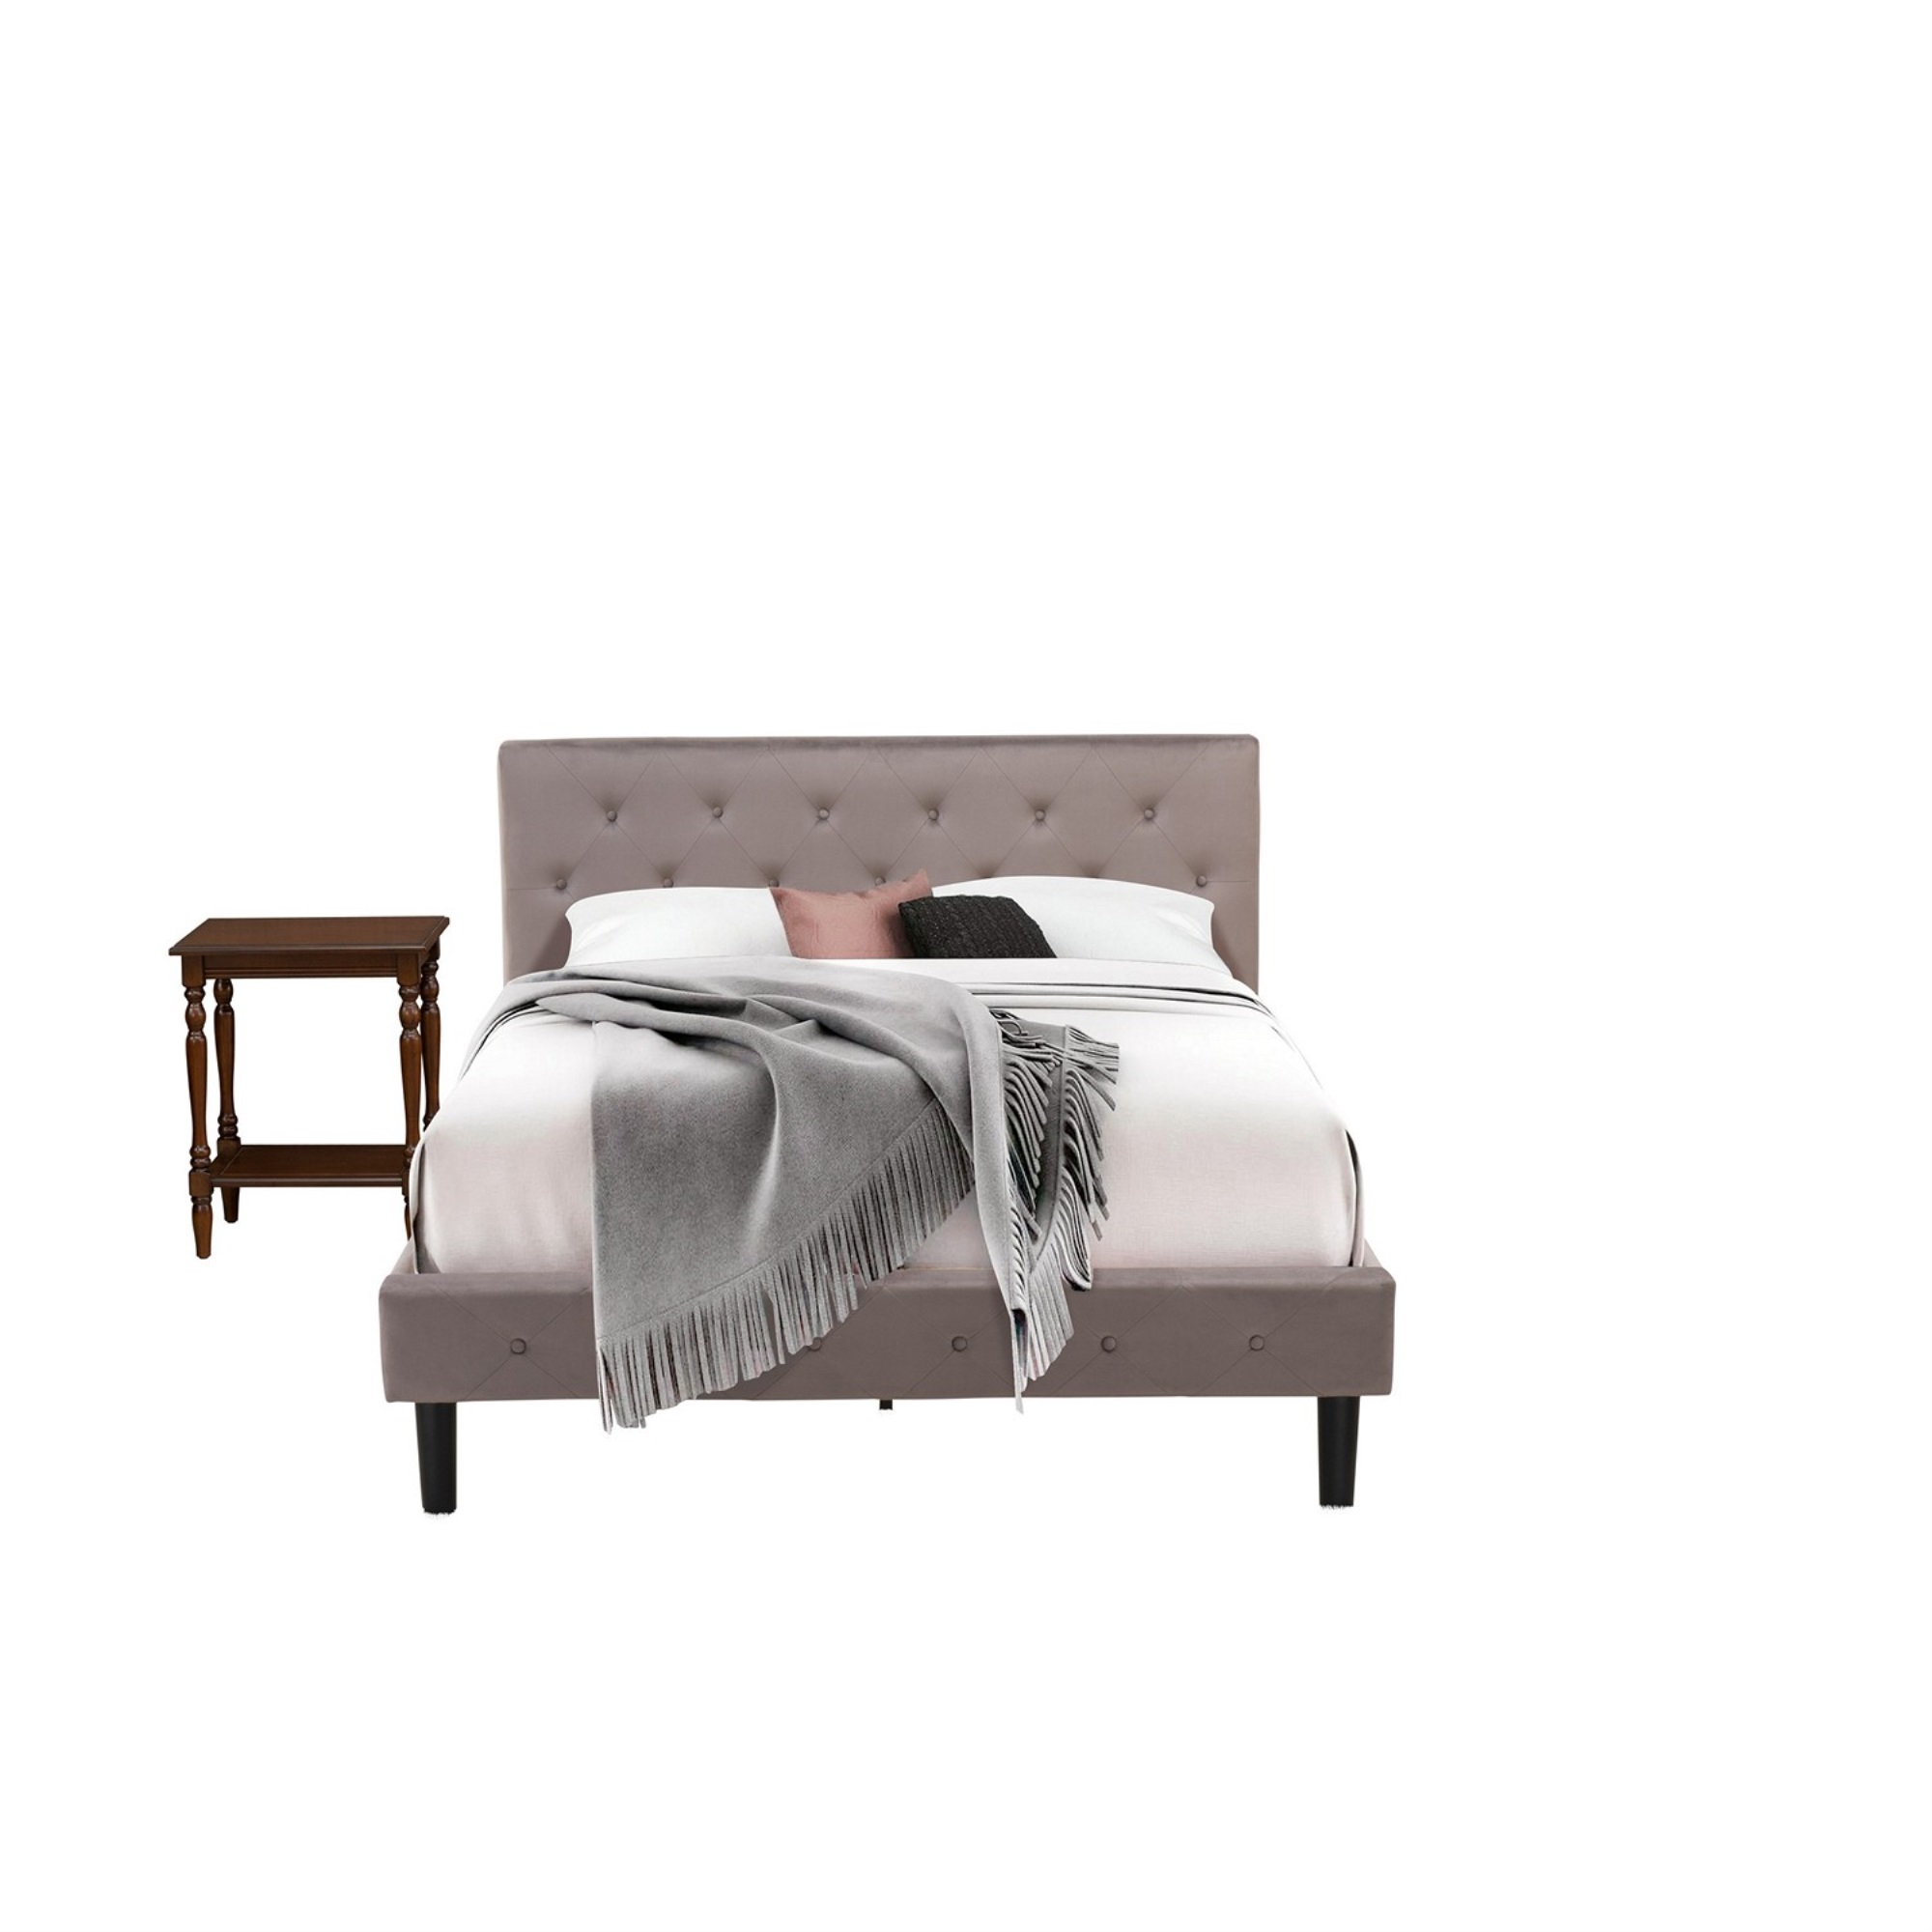 East West Furniture NL14Q-1BF0M 2 Piece Bedroom Set - Queen Size Button tufted Bed - Brown Taupe Velvet Upholstered Headboard and an Antique Mahog